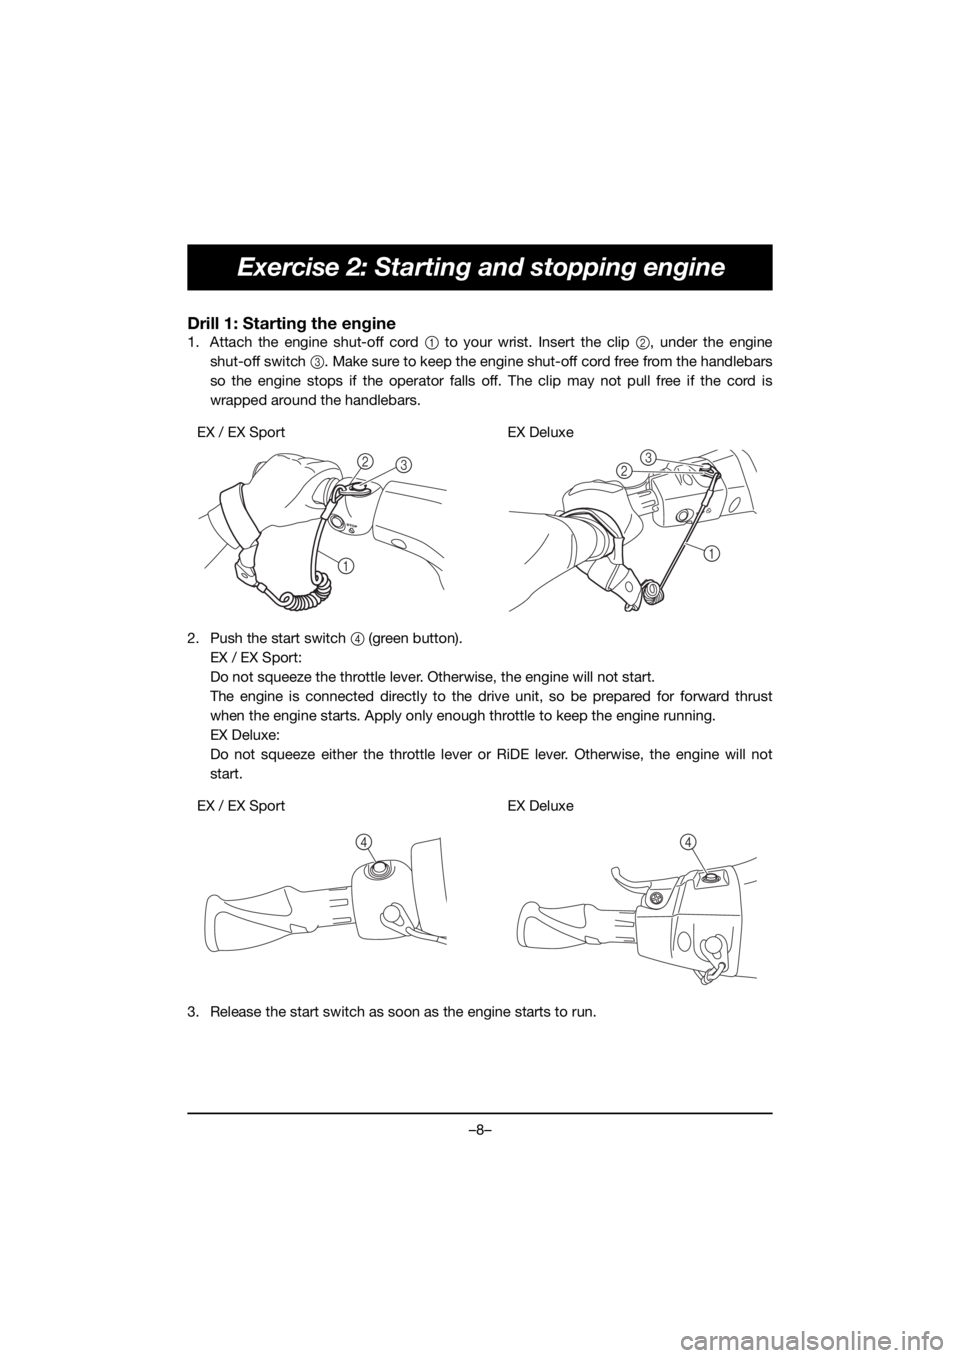 YAMAHA EX DELUXE 2020  Manuale duso (in Italian) –8–
Exercise 2: Starting and stopping engine
Drill 1: Starting the engine
1. Attach the engine shut-off cord 1 to your wrist. Insert the clip 2, under the engine
shut-off switch 3. Make sure to ke